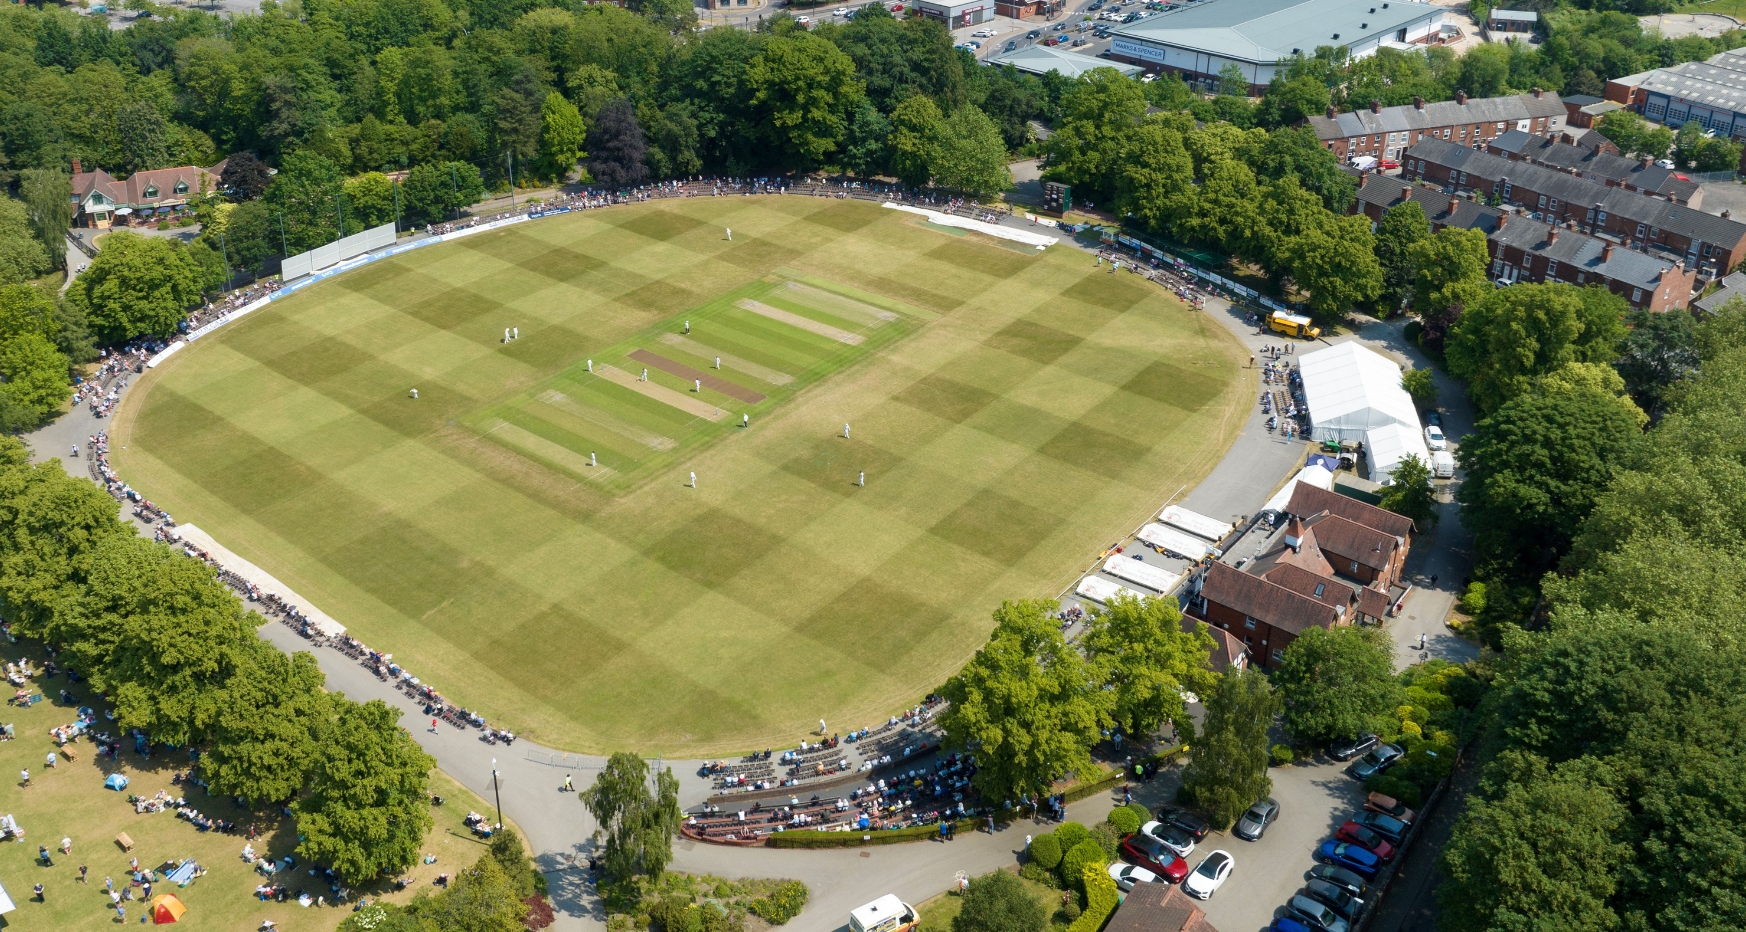 Drone shot from above of the cricket pitch at Queens Park